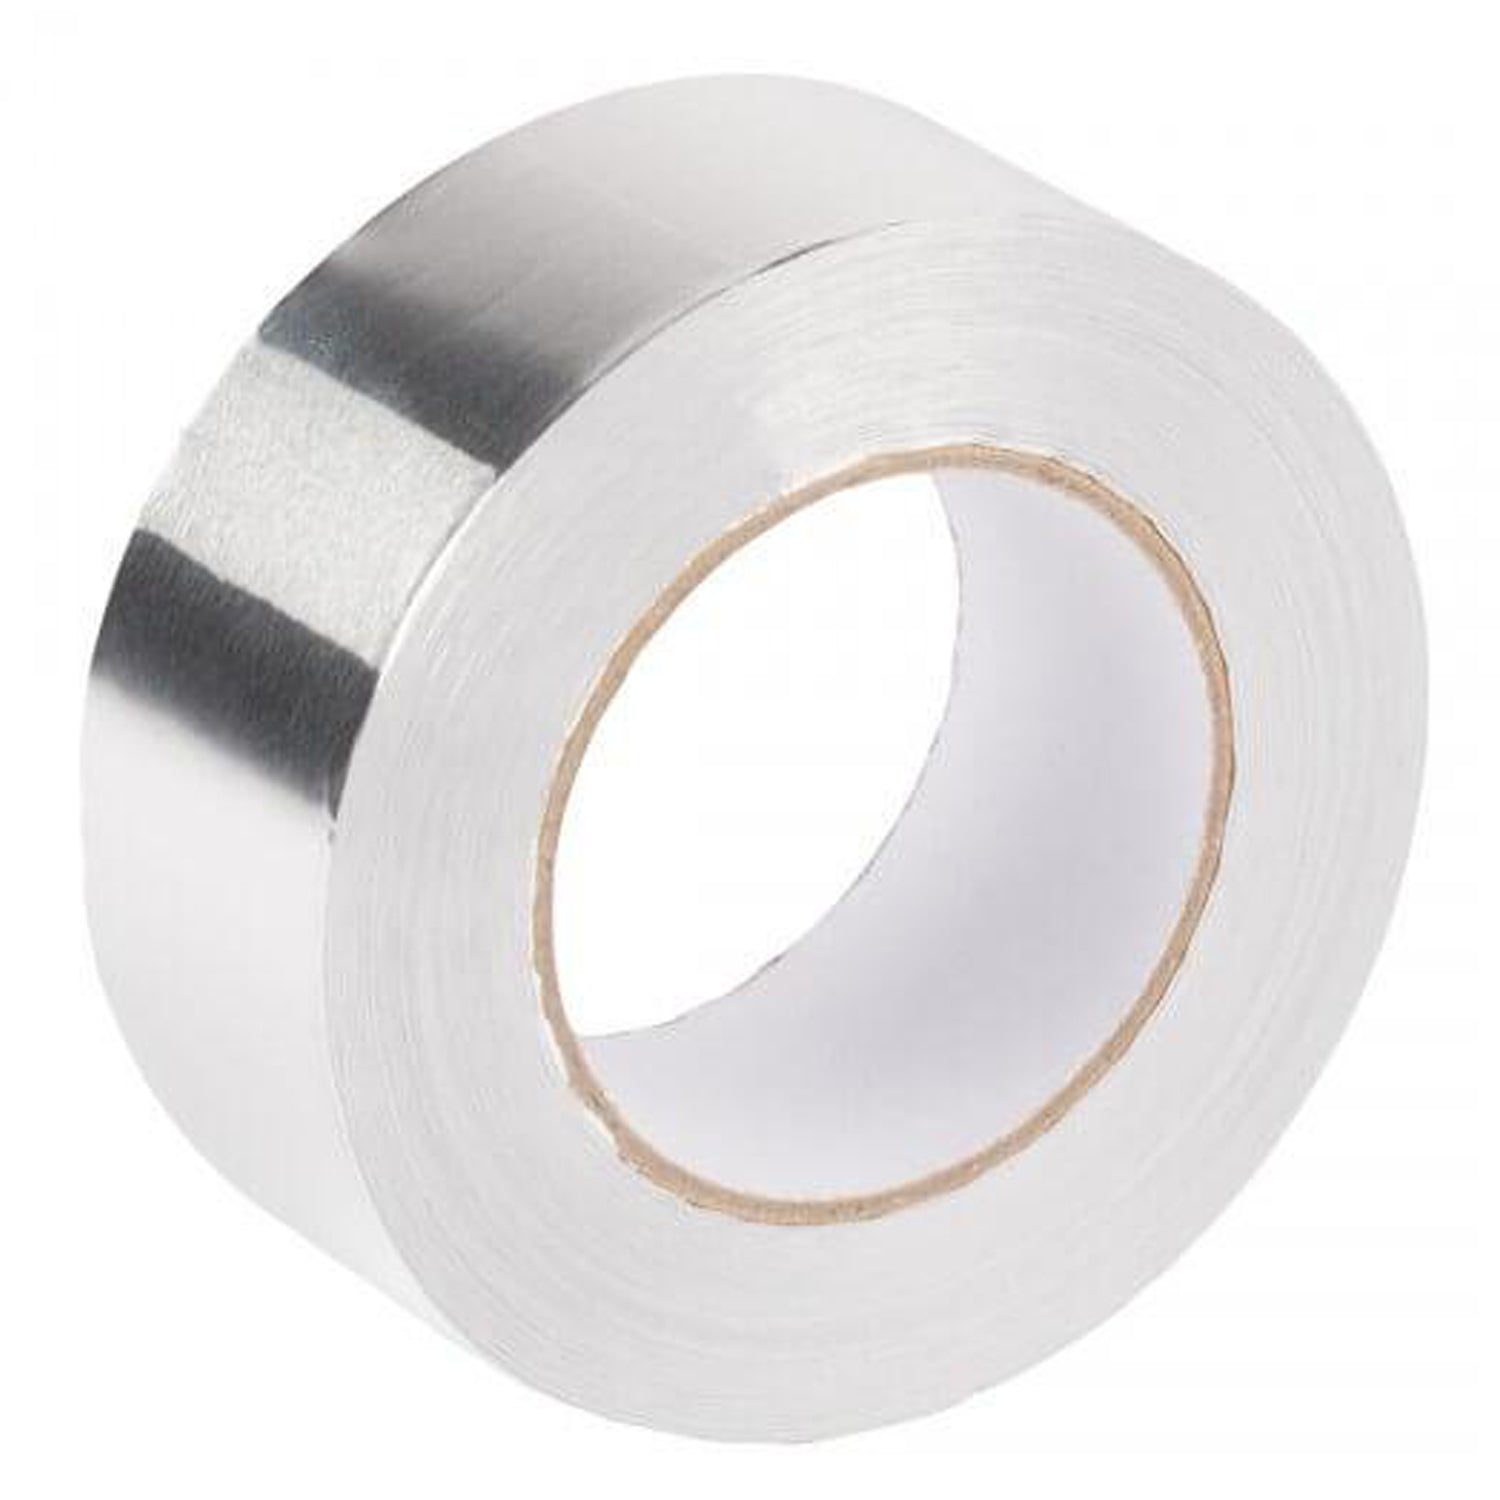 Aluminum FOIL Tape, 48mm x 45m (1.9" x 148') with Liner Peel Backing (6/ Pack)